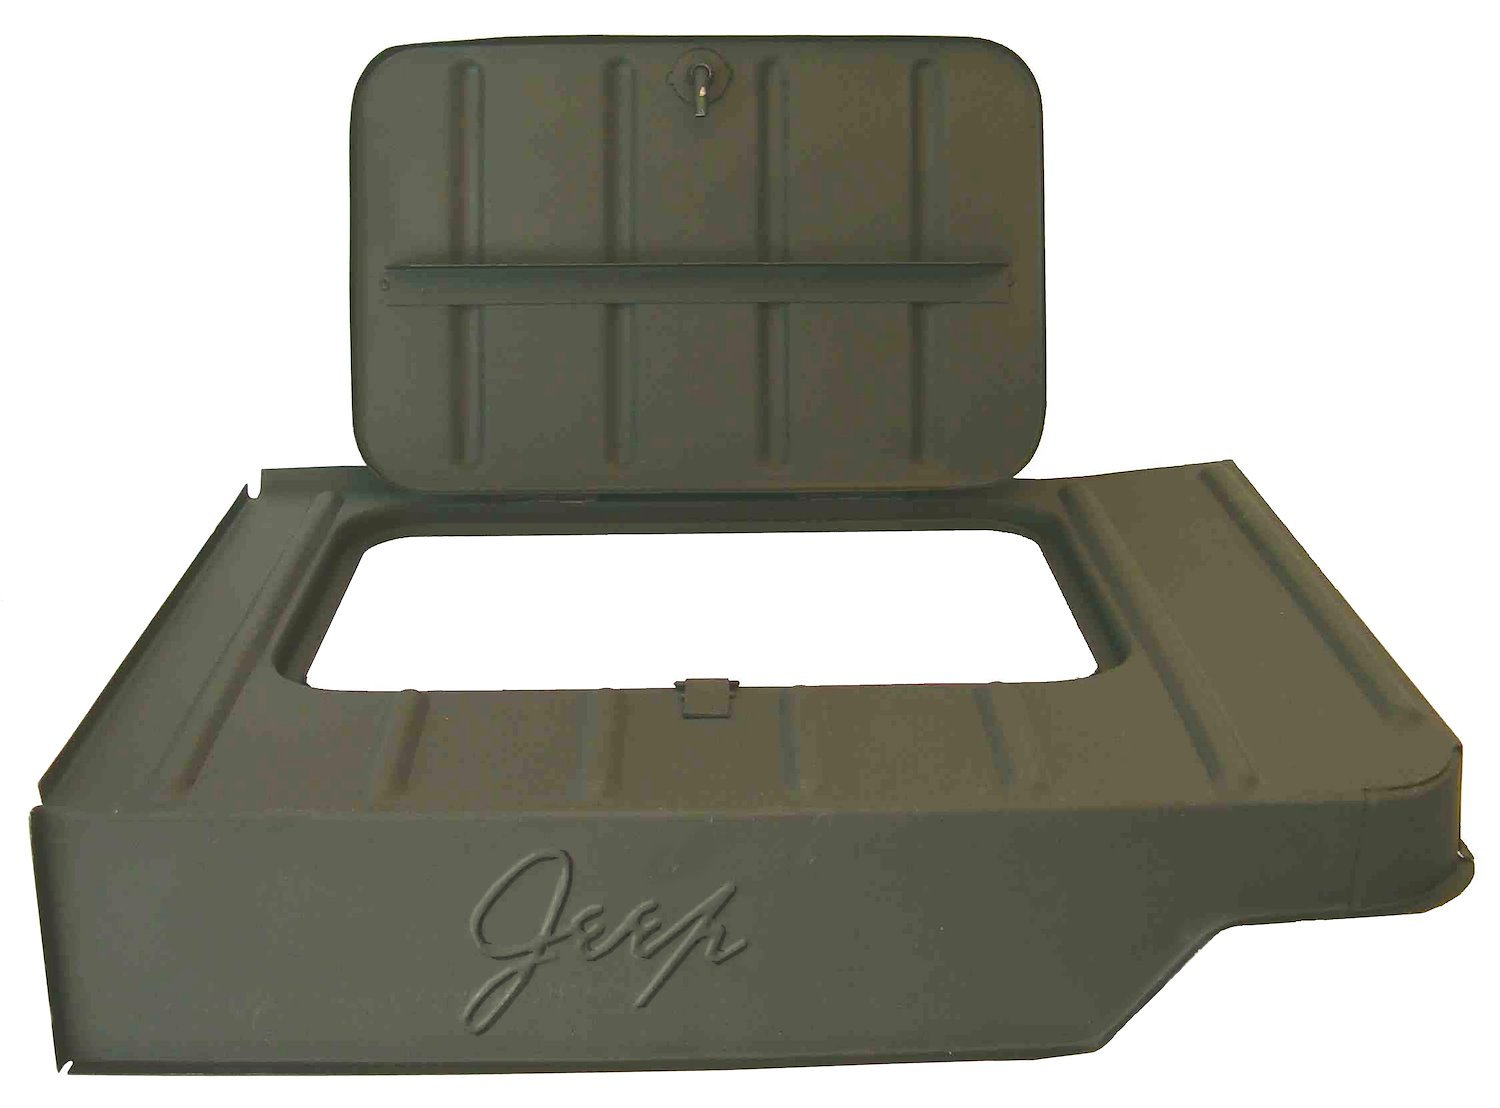 Replacement tool compartment has officially licensed Jeep script and, Fits 46-75 Willys and Jeep models